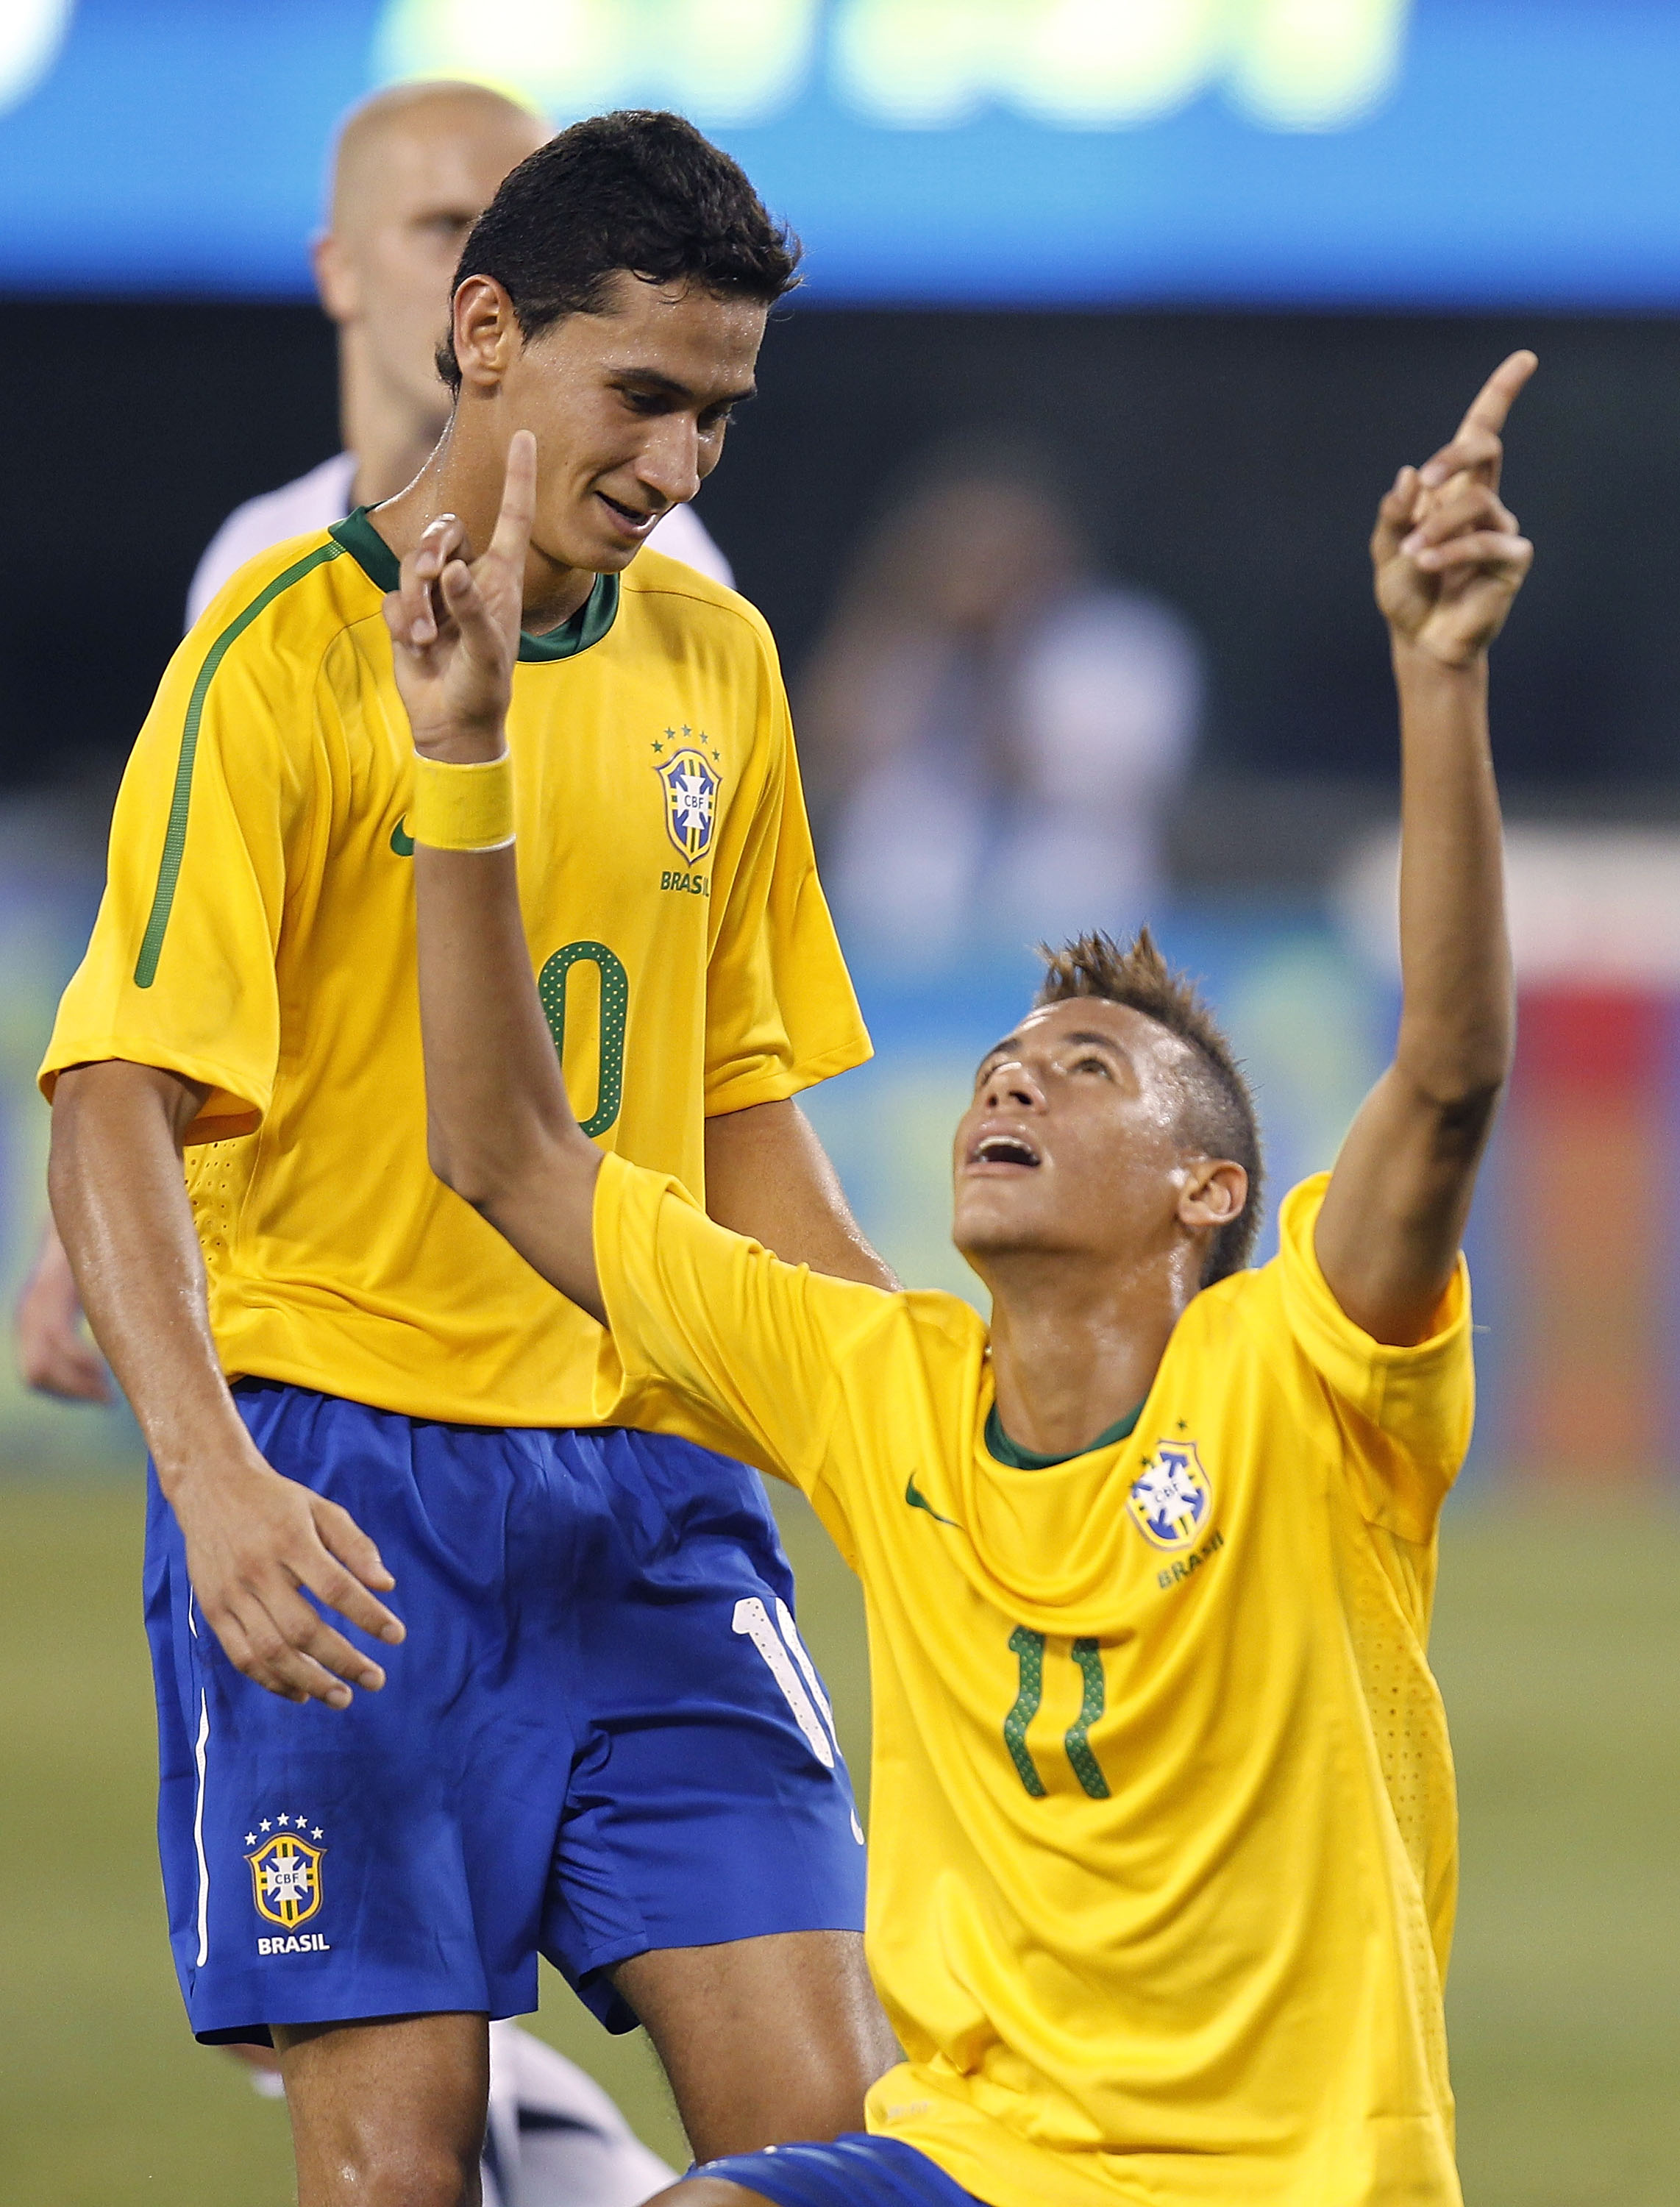 EAST RUTHERFORD, NJ - AUGUST 10: Neymar #11 and Paulo Henrique Ganso #10 of Brazil celebrate Neymar's goal against the U.S. in the first half of a friendly match at the New Meadowlands on August 10, 2010 in East Rutherford, New Jersey. (Photo by Jeff Zele